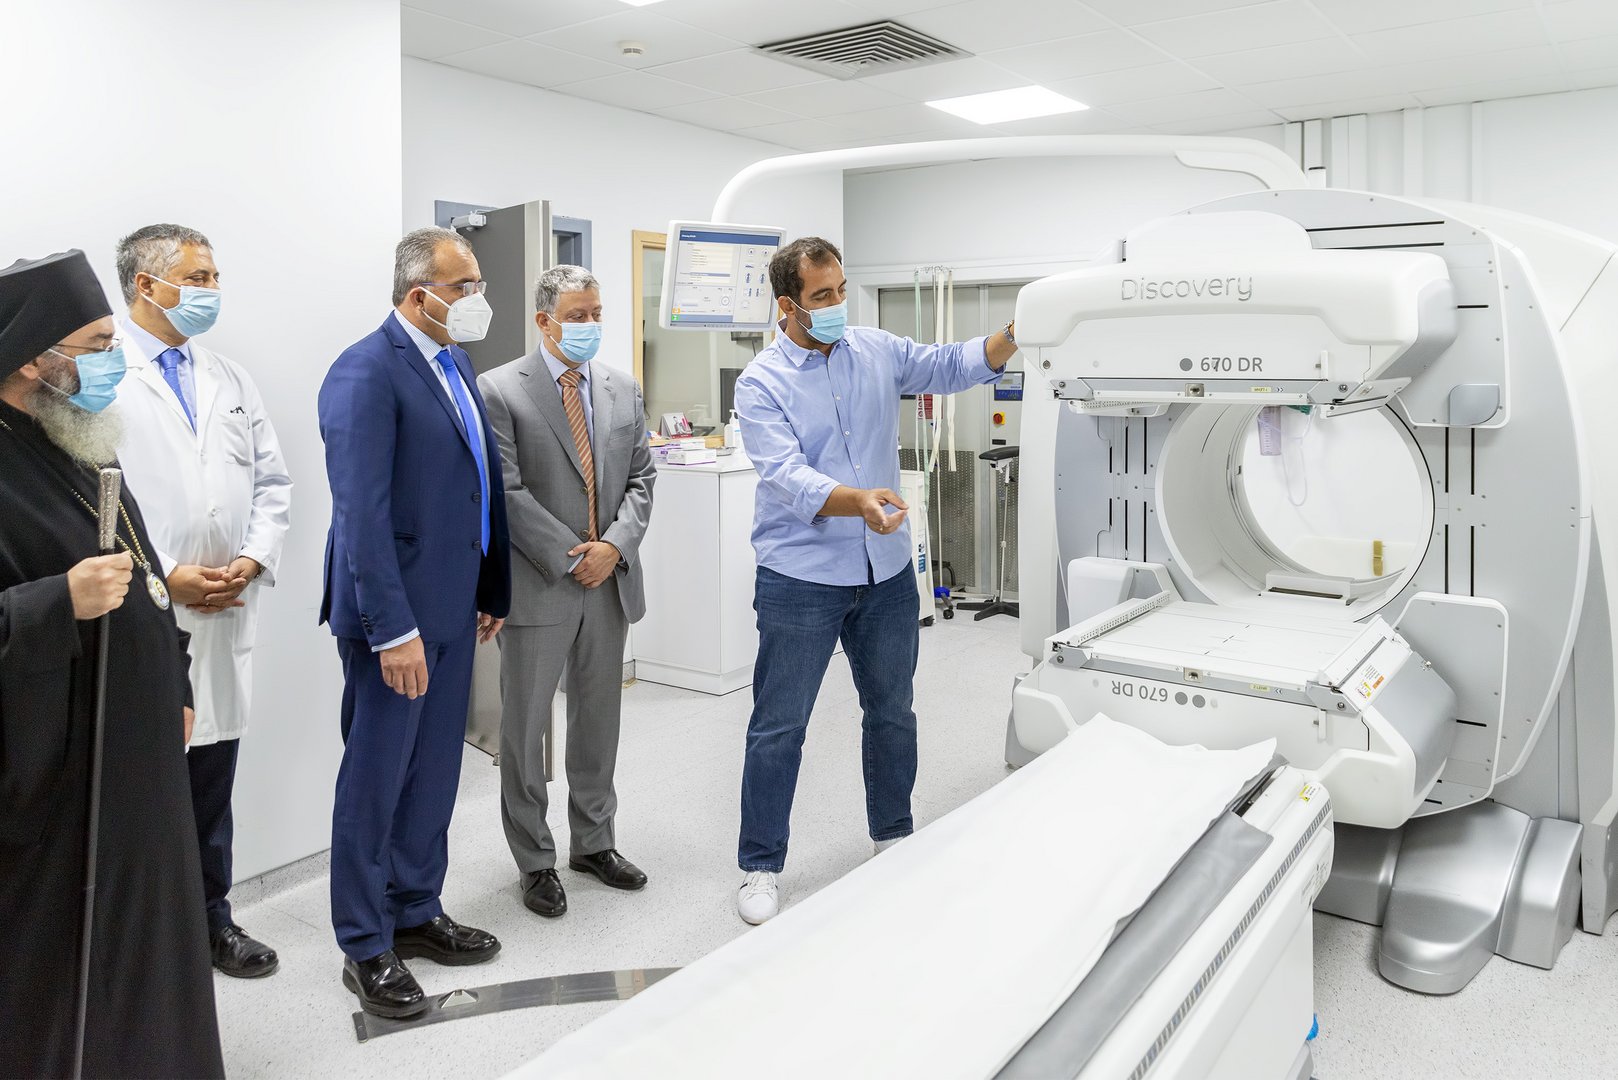 image Okypy investing in technology minister says unveiling new Limassol equipment